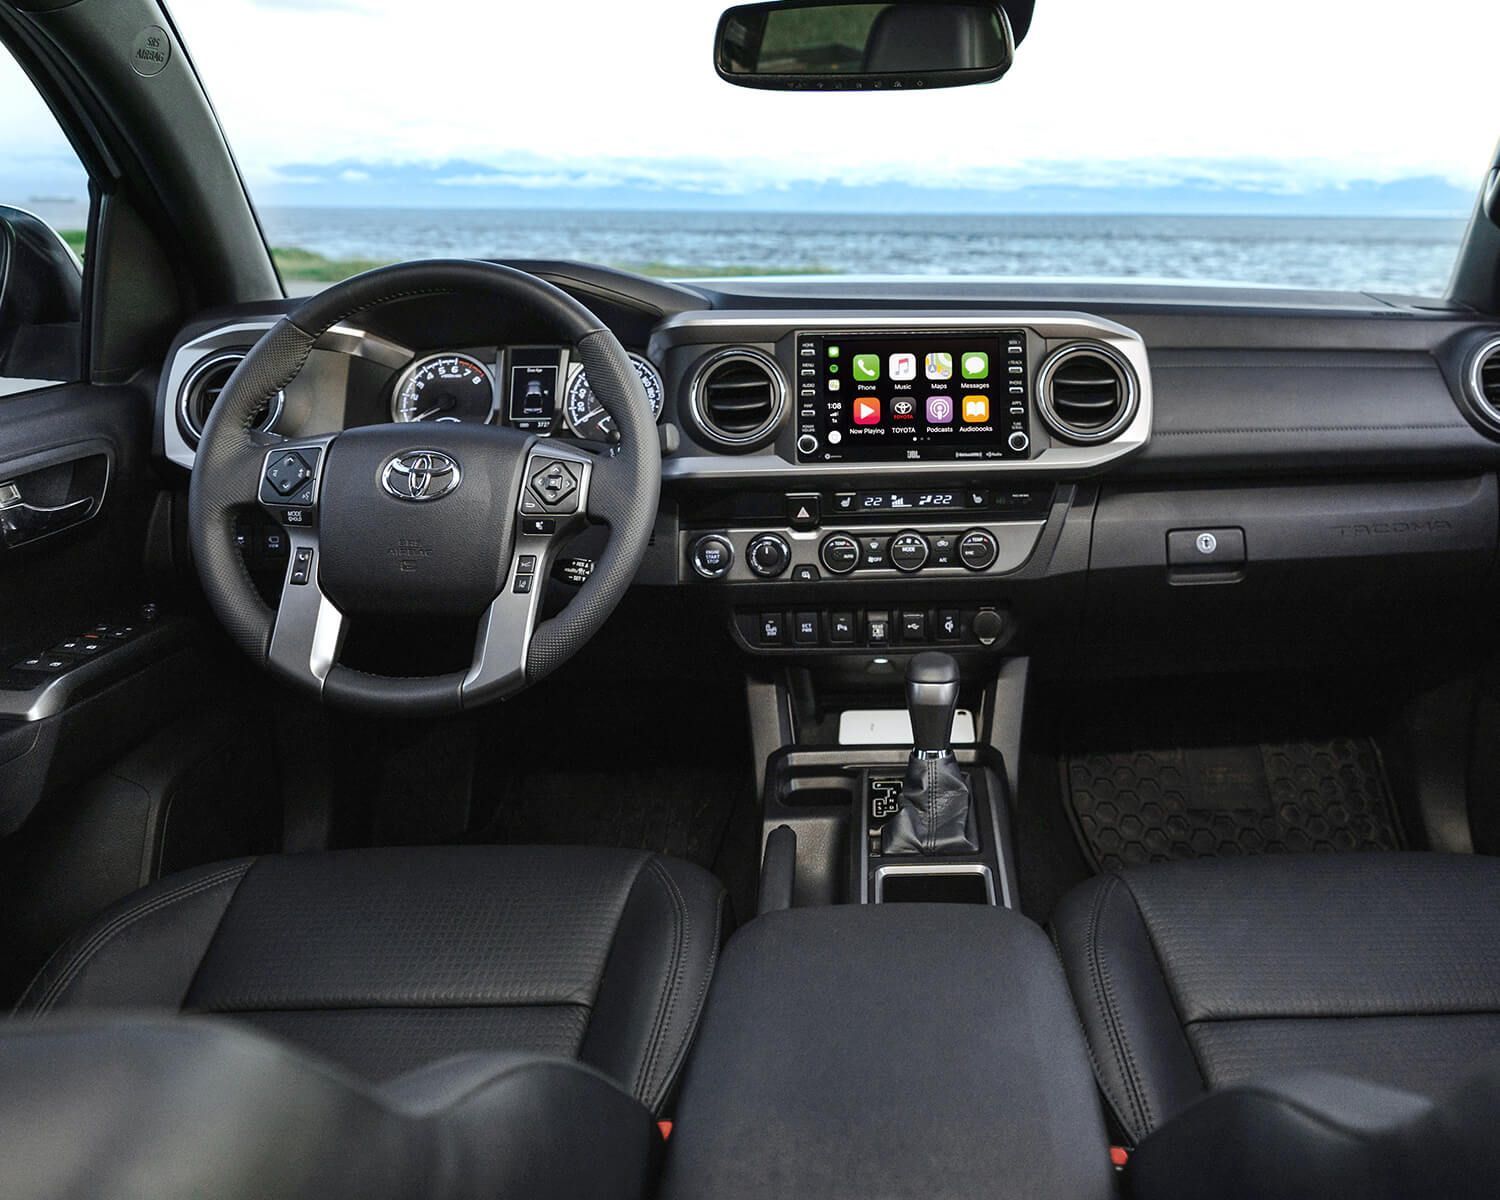 2022 Toyota Tacoma dashboard with all its on-board technologies including Apple CarPlay